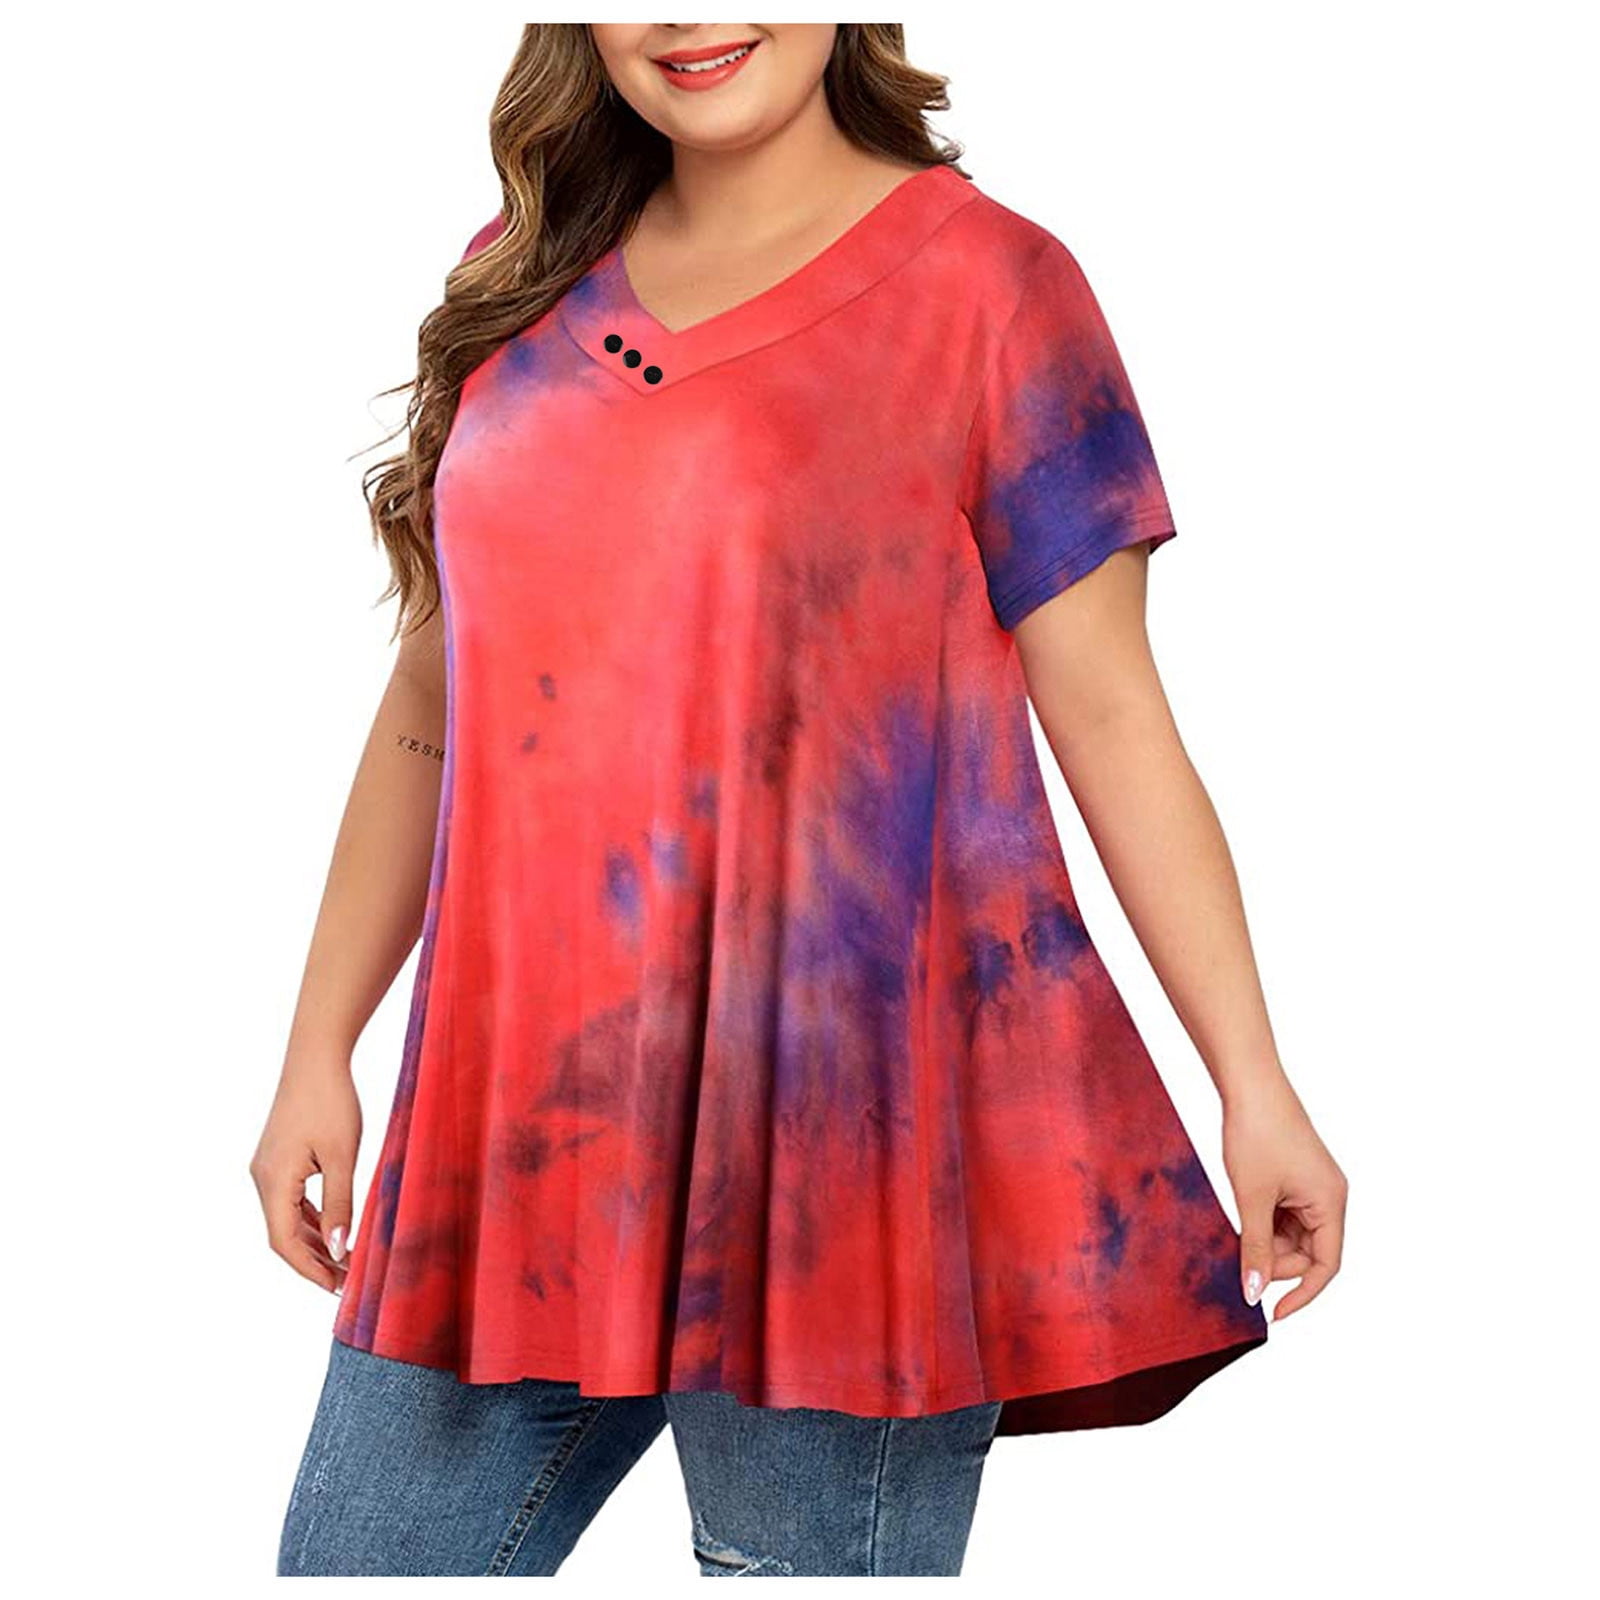 Yskkt Womens Tie Dye 3/4 Sleeve T-Shirt Plus Size Round Neck High Low Loose Casual Tunic Tops 